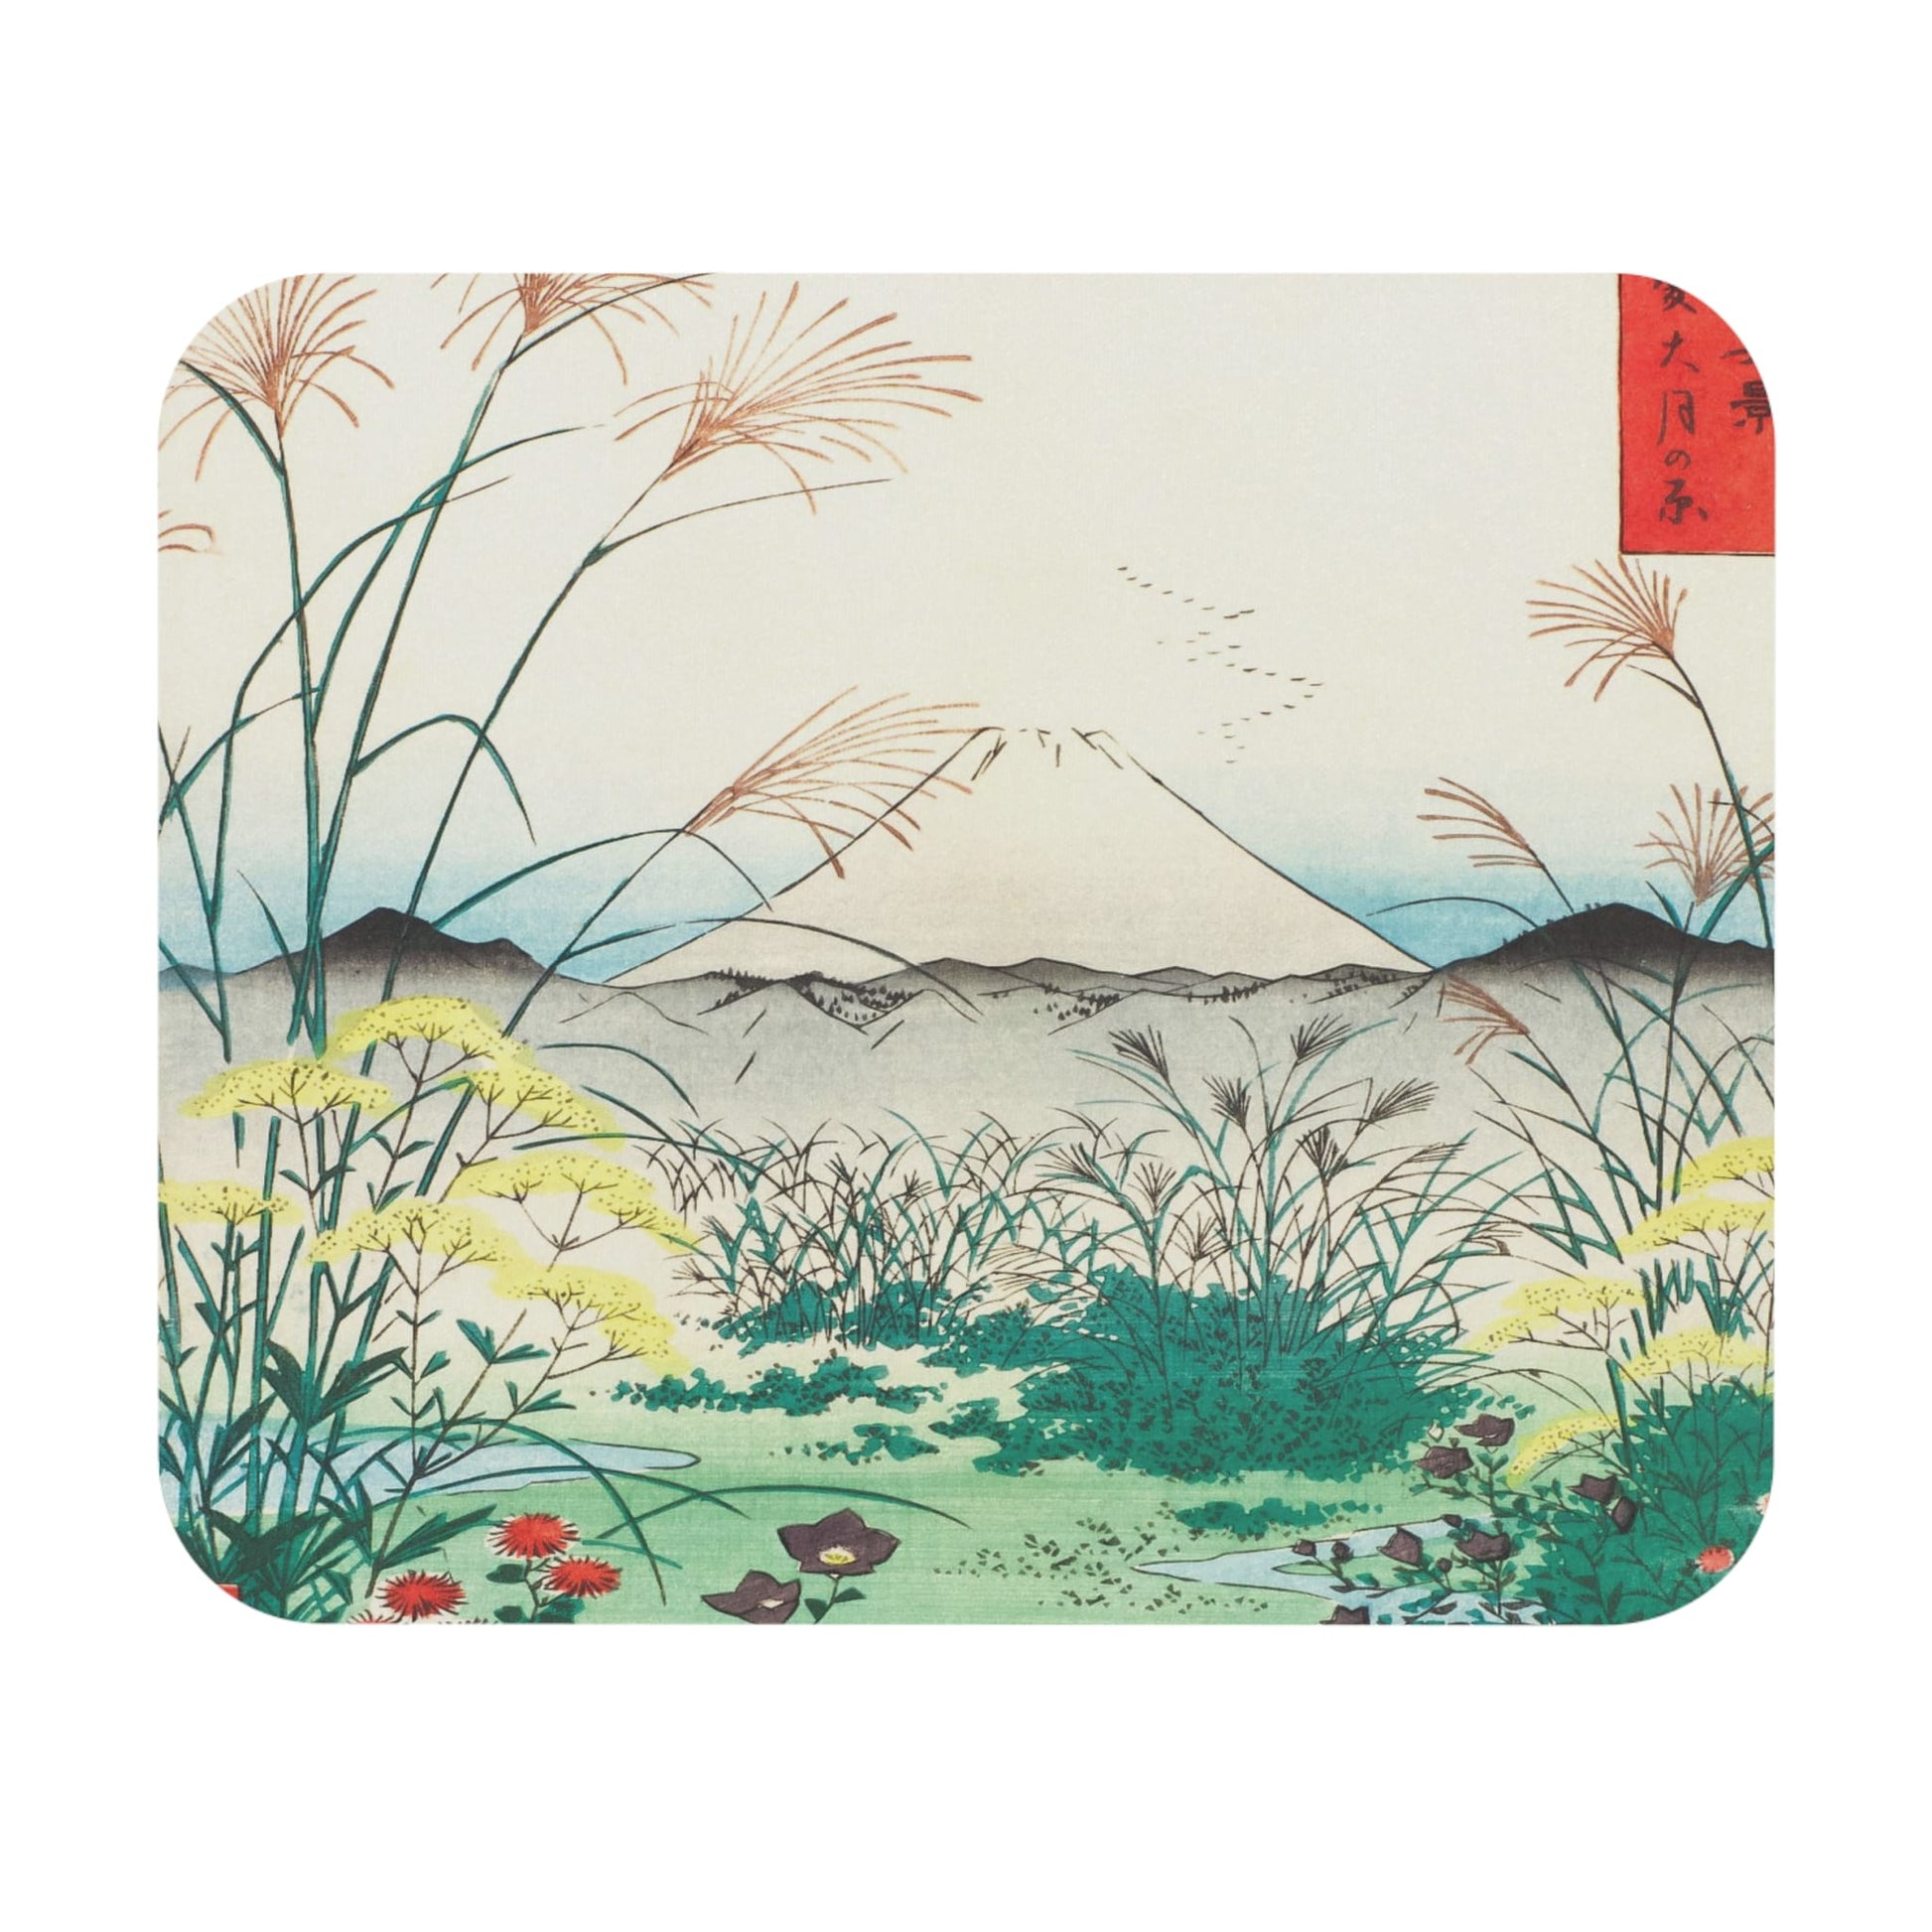 Japanese Spring Landscape Mouse Pad featuring a serene mountains design, perfect for desk and office decor.